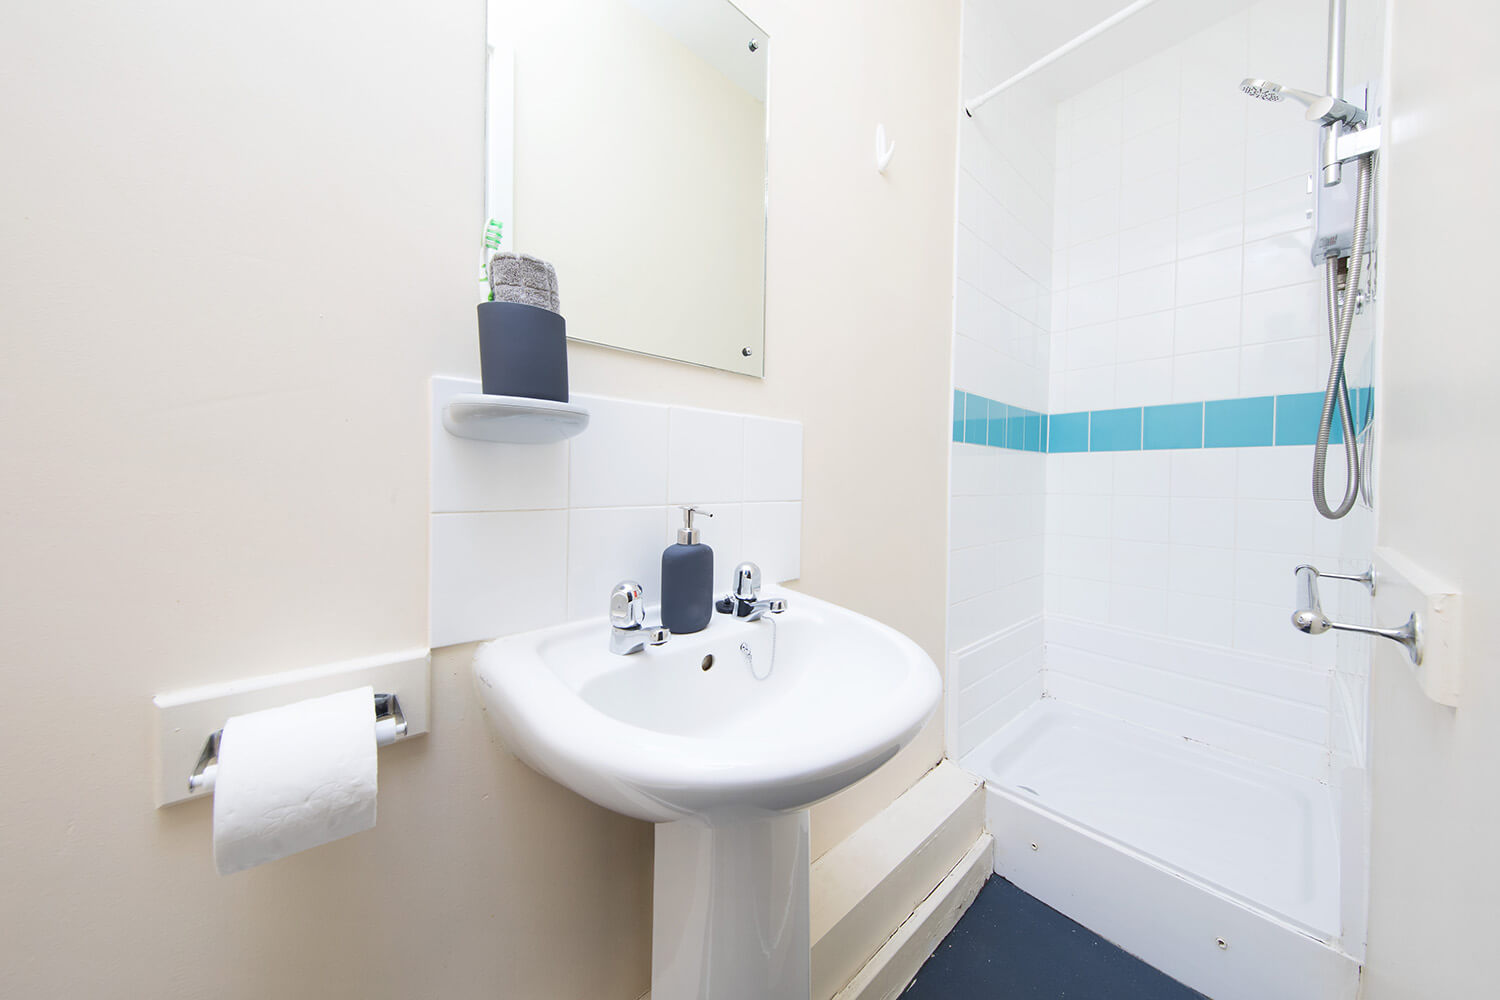 Student accommodation bathroom sink and shower in Liverpool